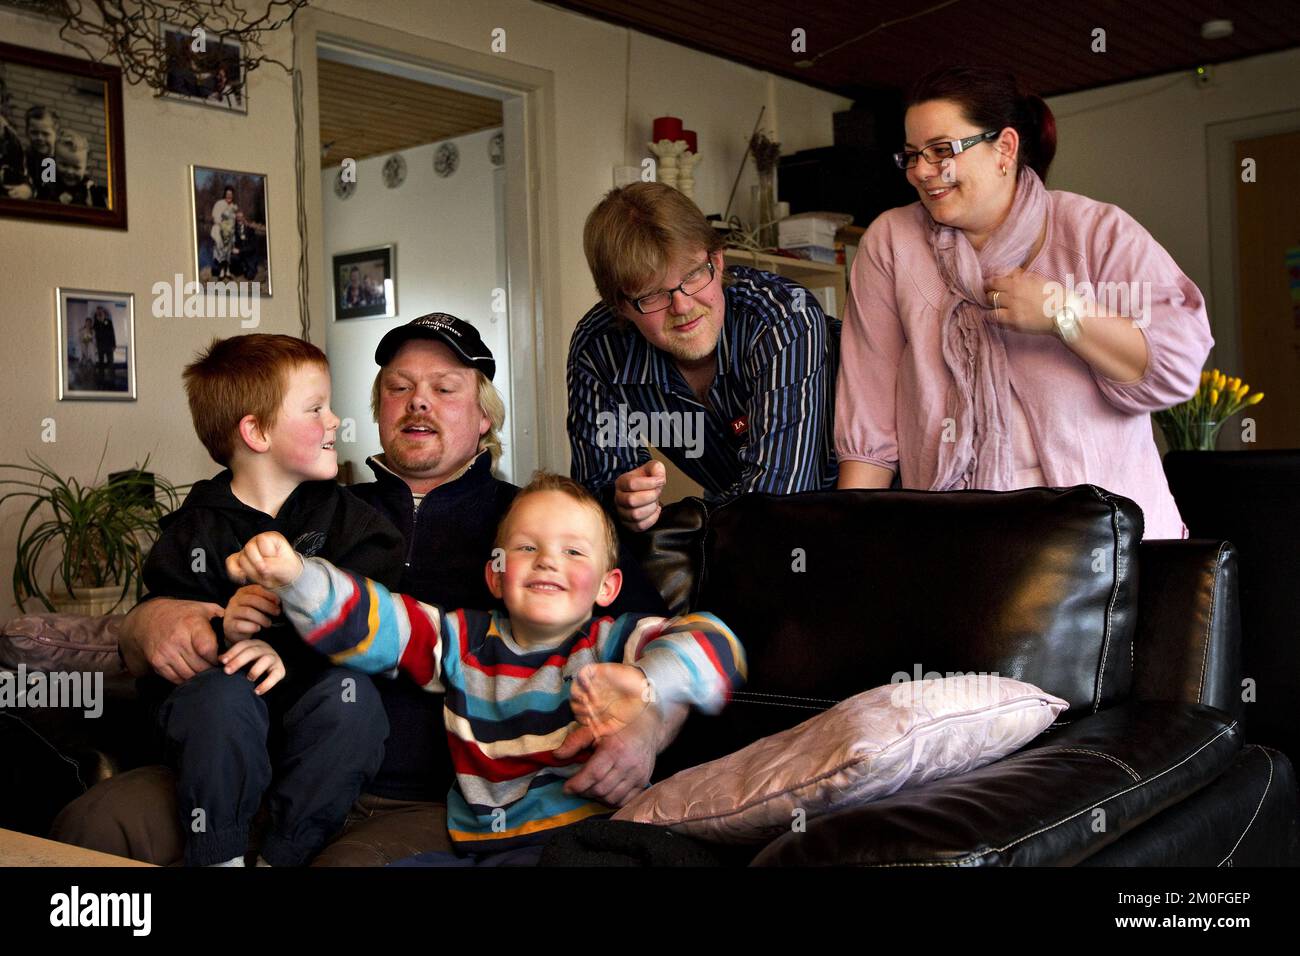 Michael Nielsen (second right) and his son Marcus (centre) alongside Tommy Kallehauge (second left) and son Lucas (left) with mother Charlotte Hilbrandt (right). Twins Marcus and Lucas, born 48 minutes apart have two different fathers. Mum Charlotte Hilbrandt became pregnant by ex-husband Michael and new boyfriend Tommy when she slept with both men within 48 hours. Stock Photo